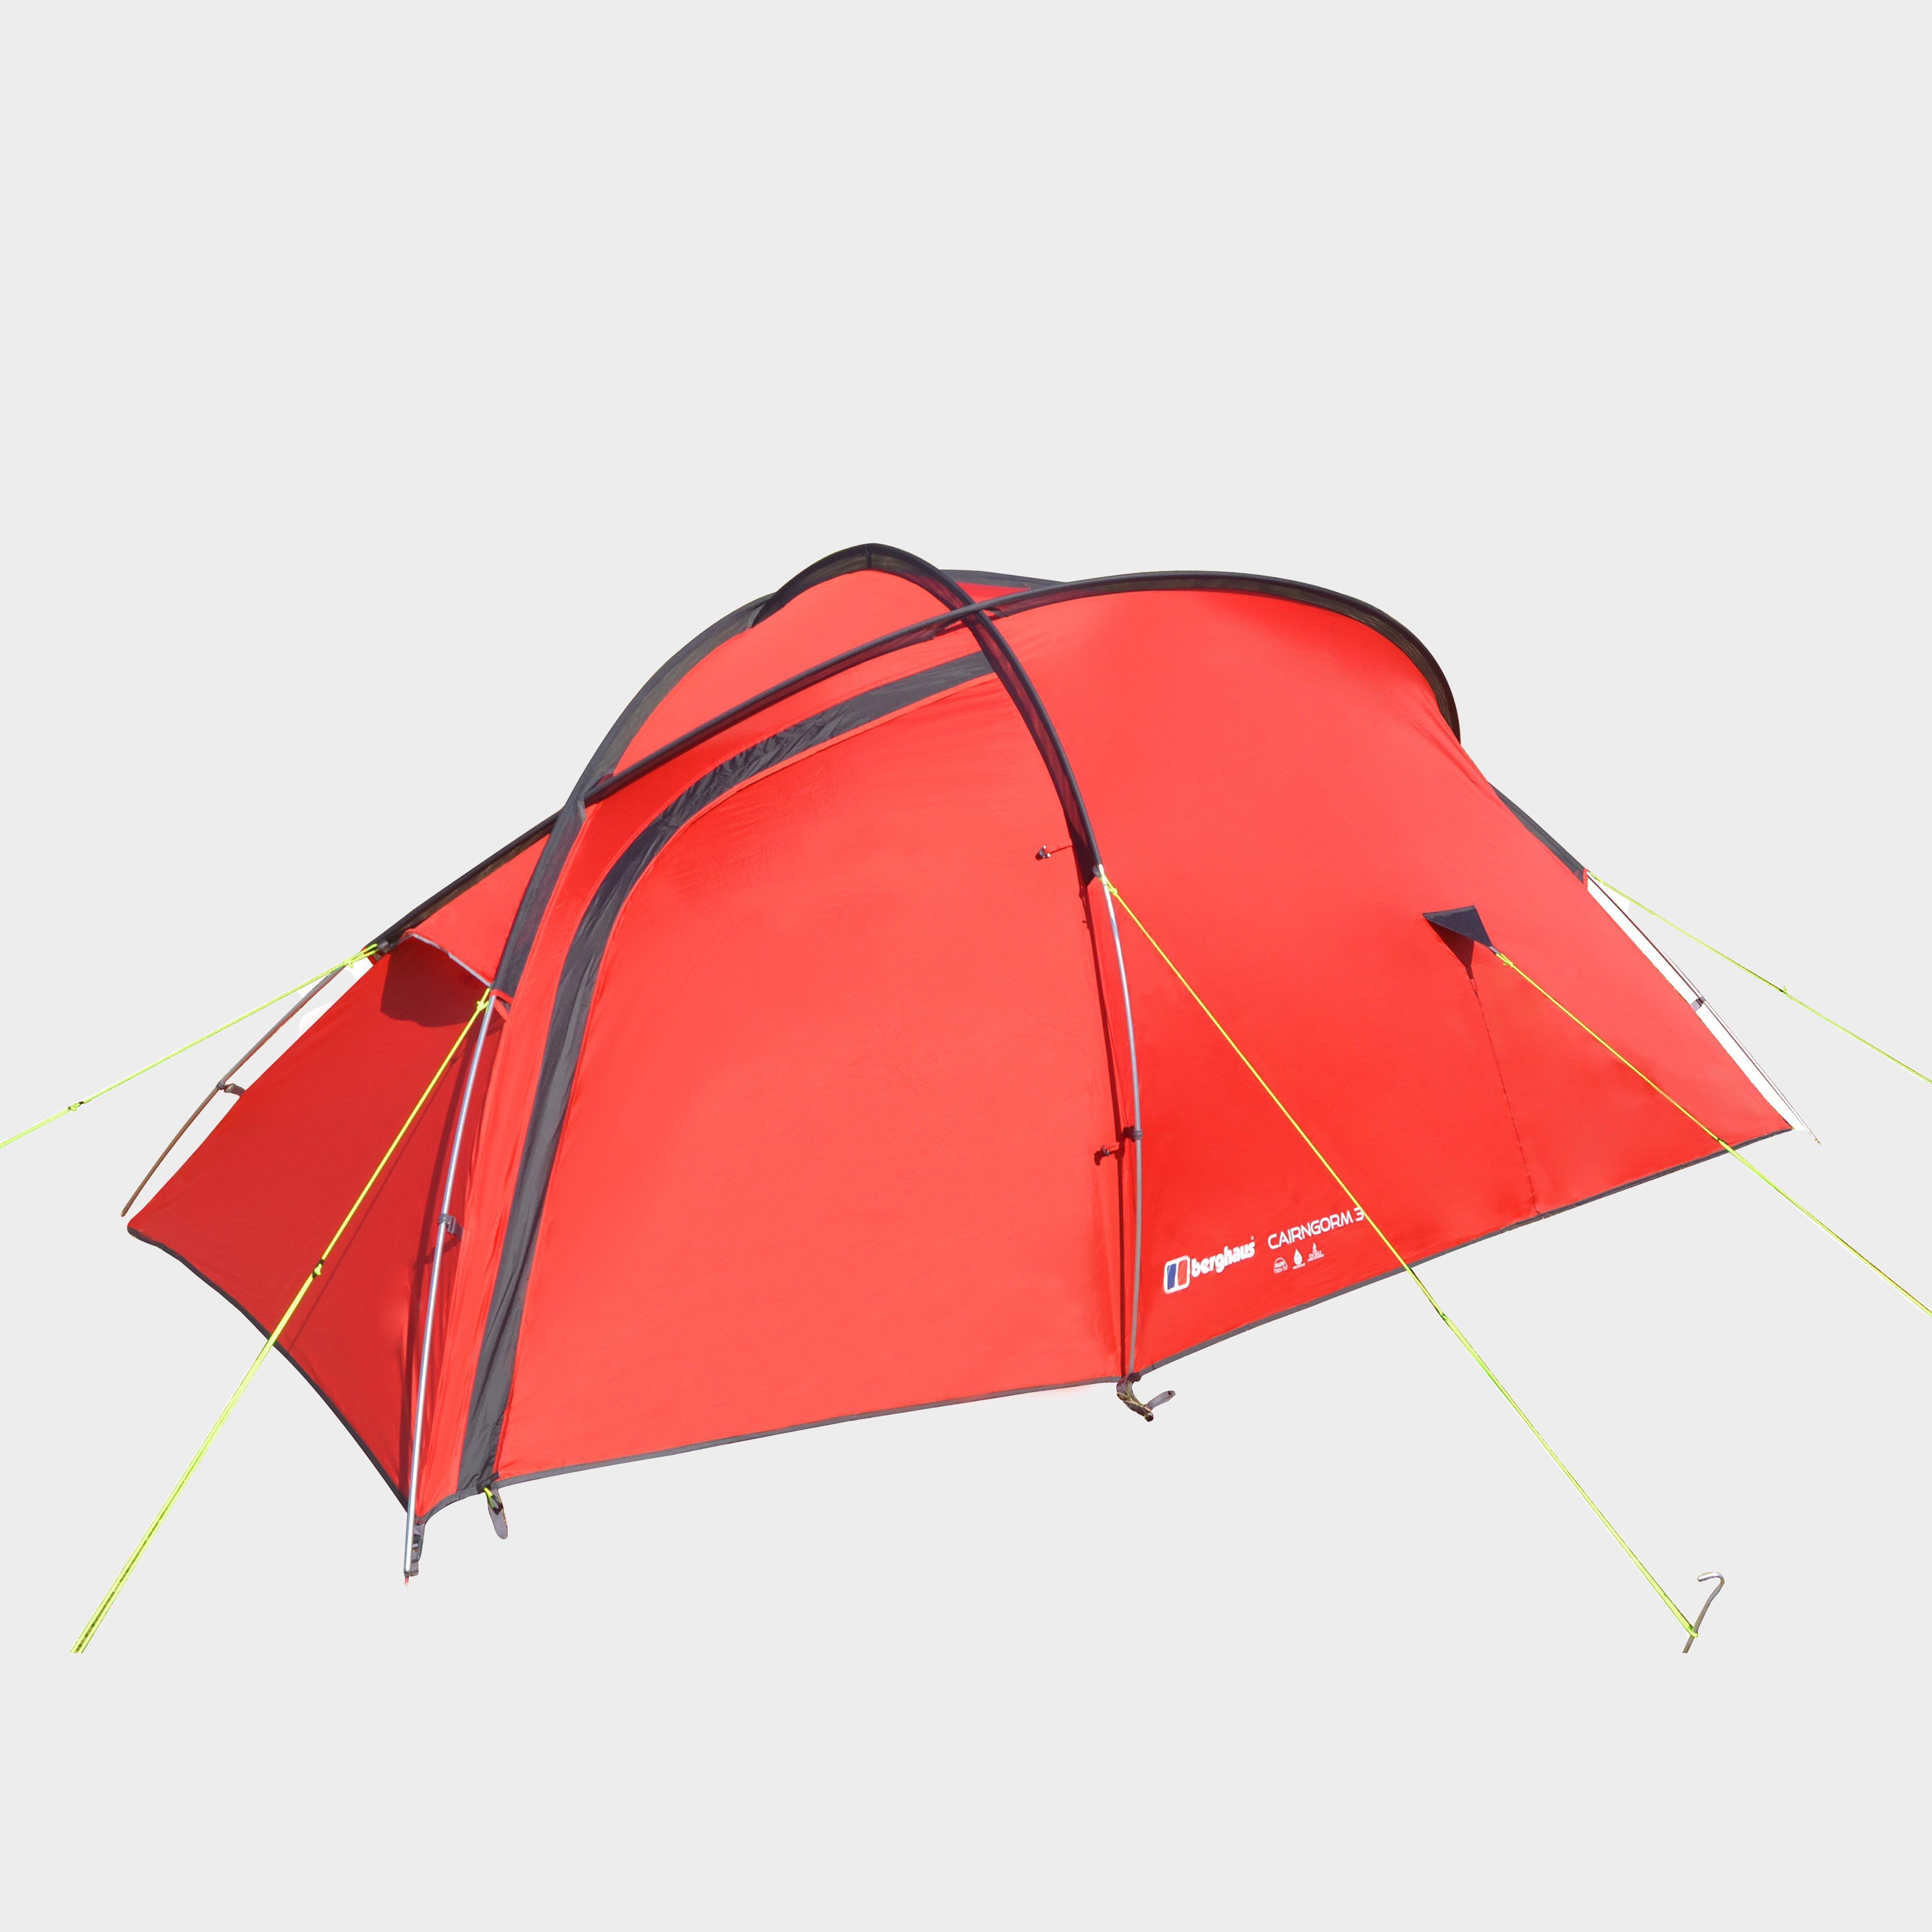 Details about   Tent 3 Person Camping Outdoor Living Family Hiking Tents Light Weight